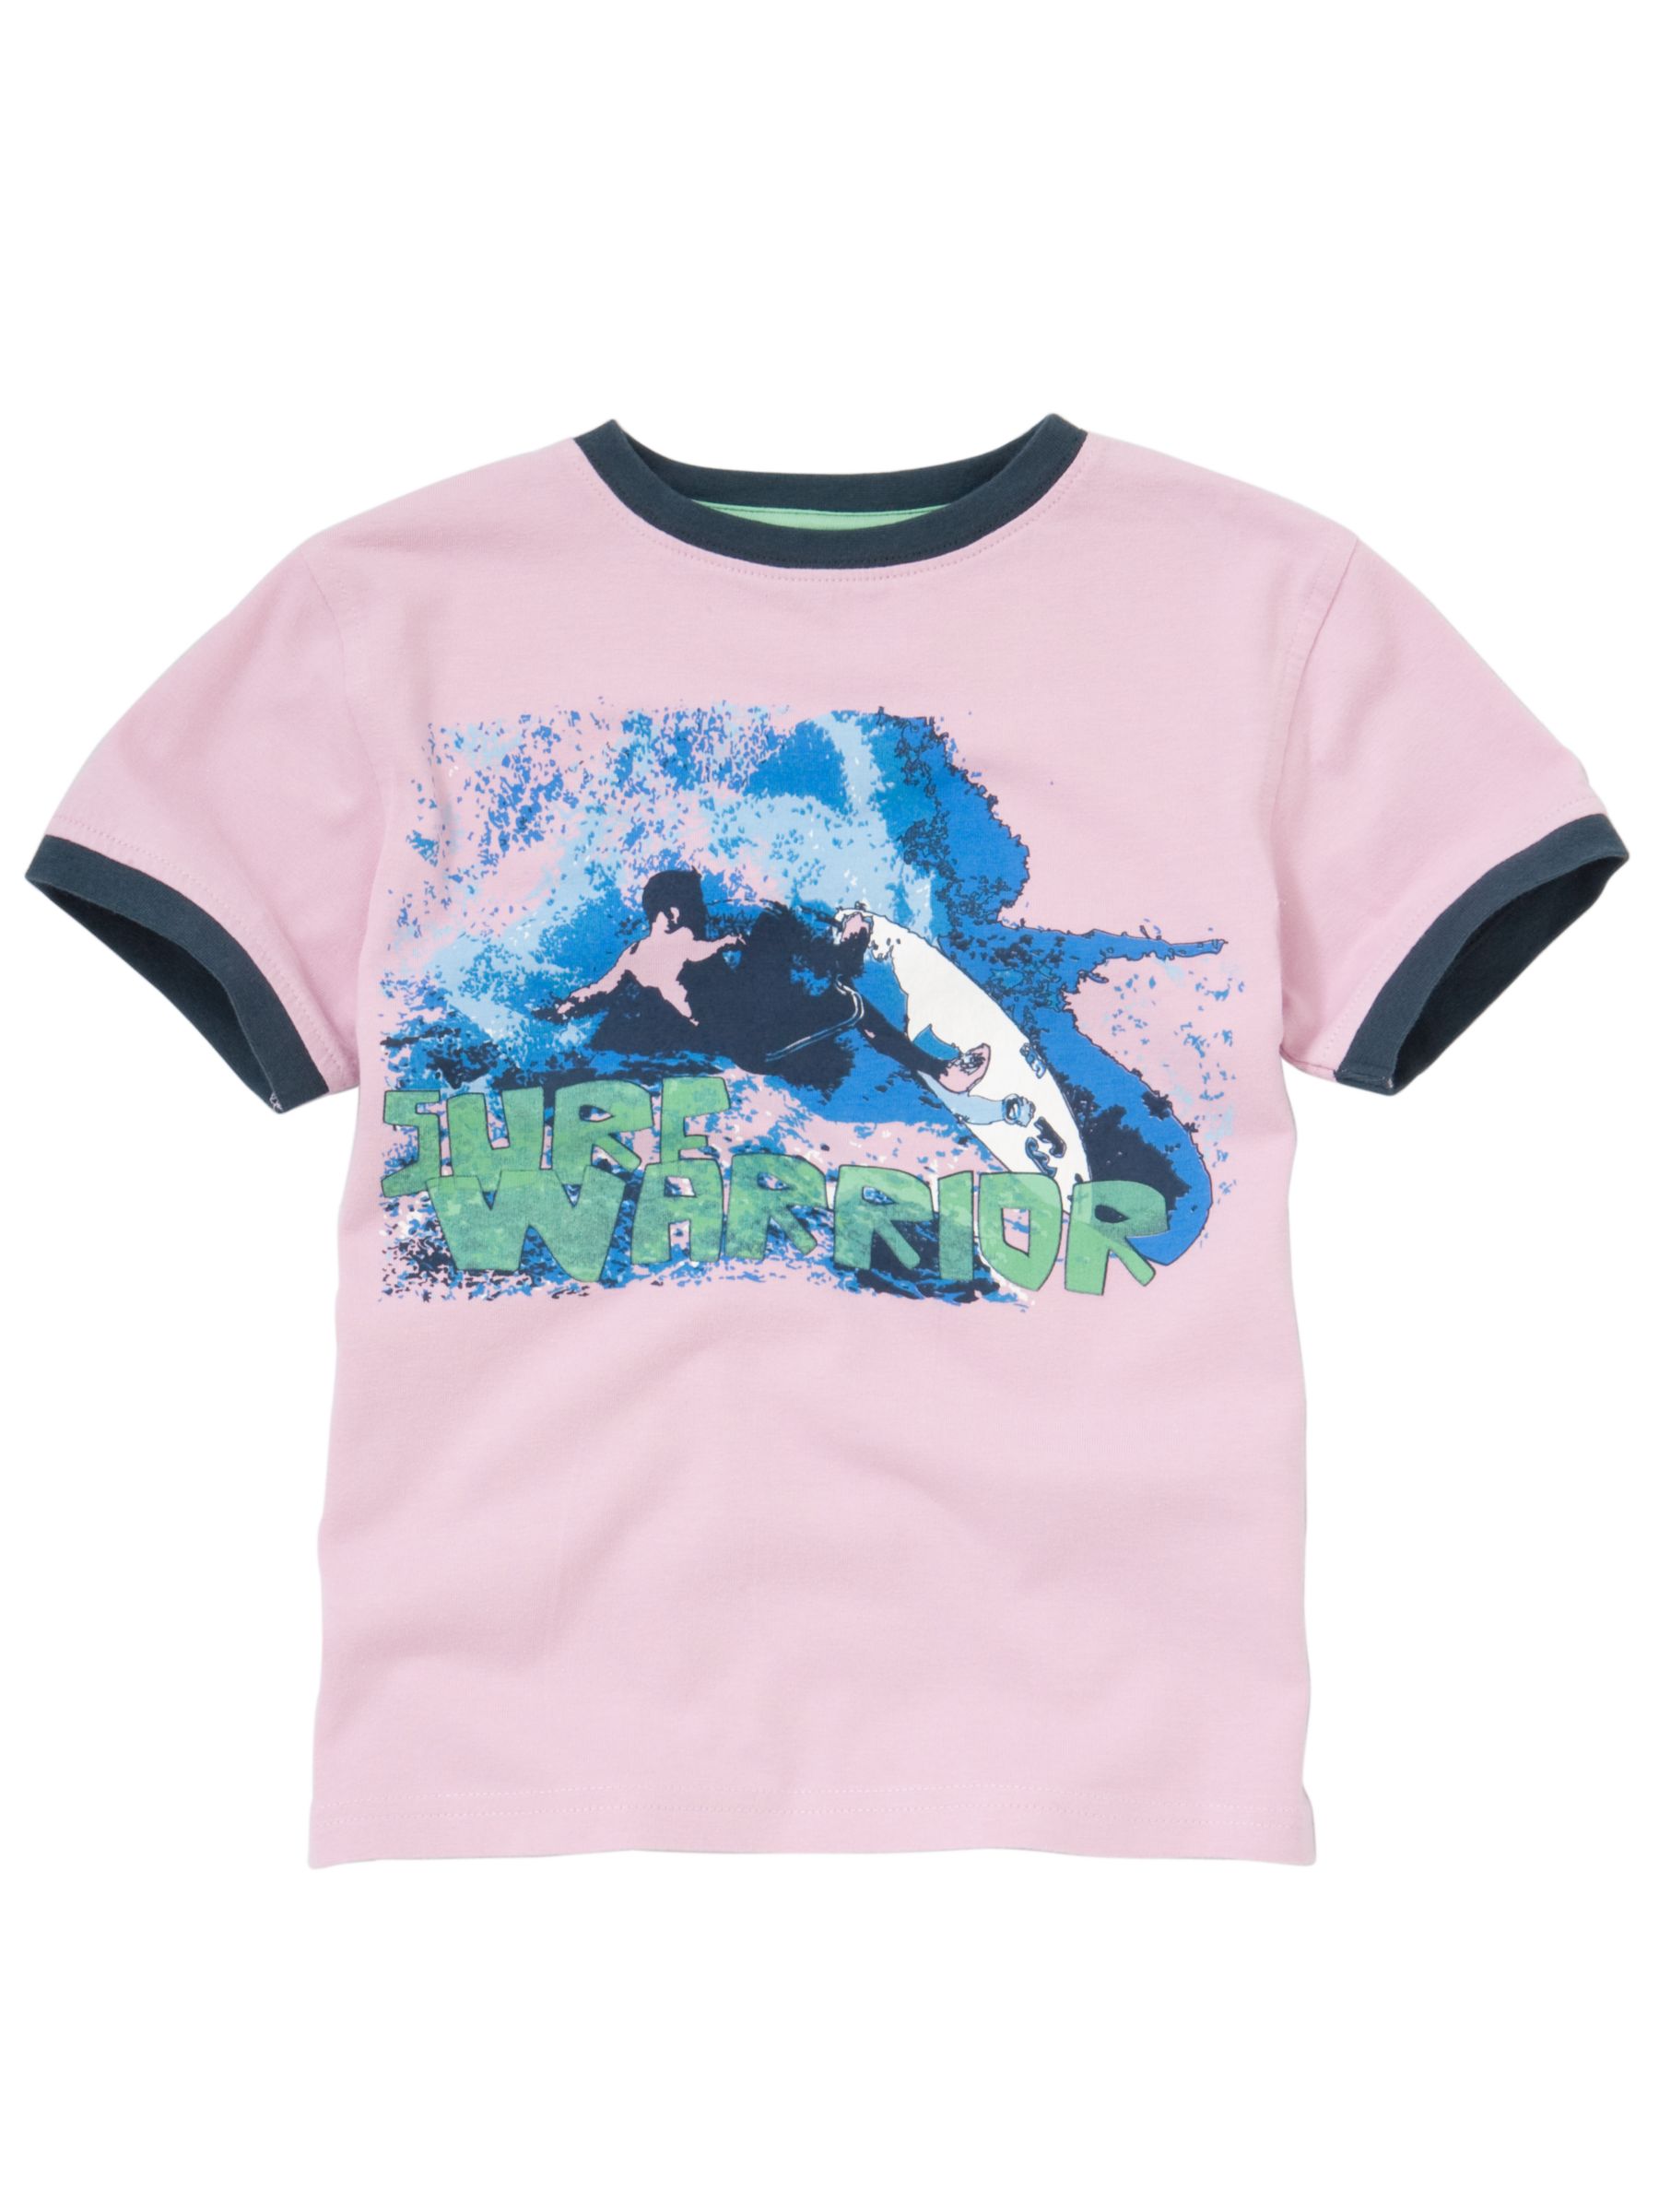 Surfer Graphic T-Shirt, Pink